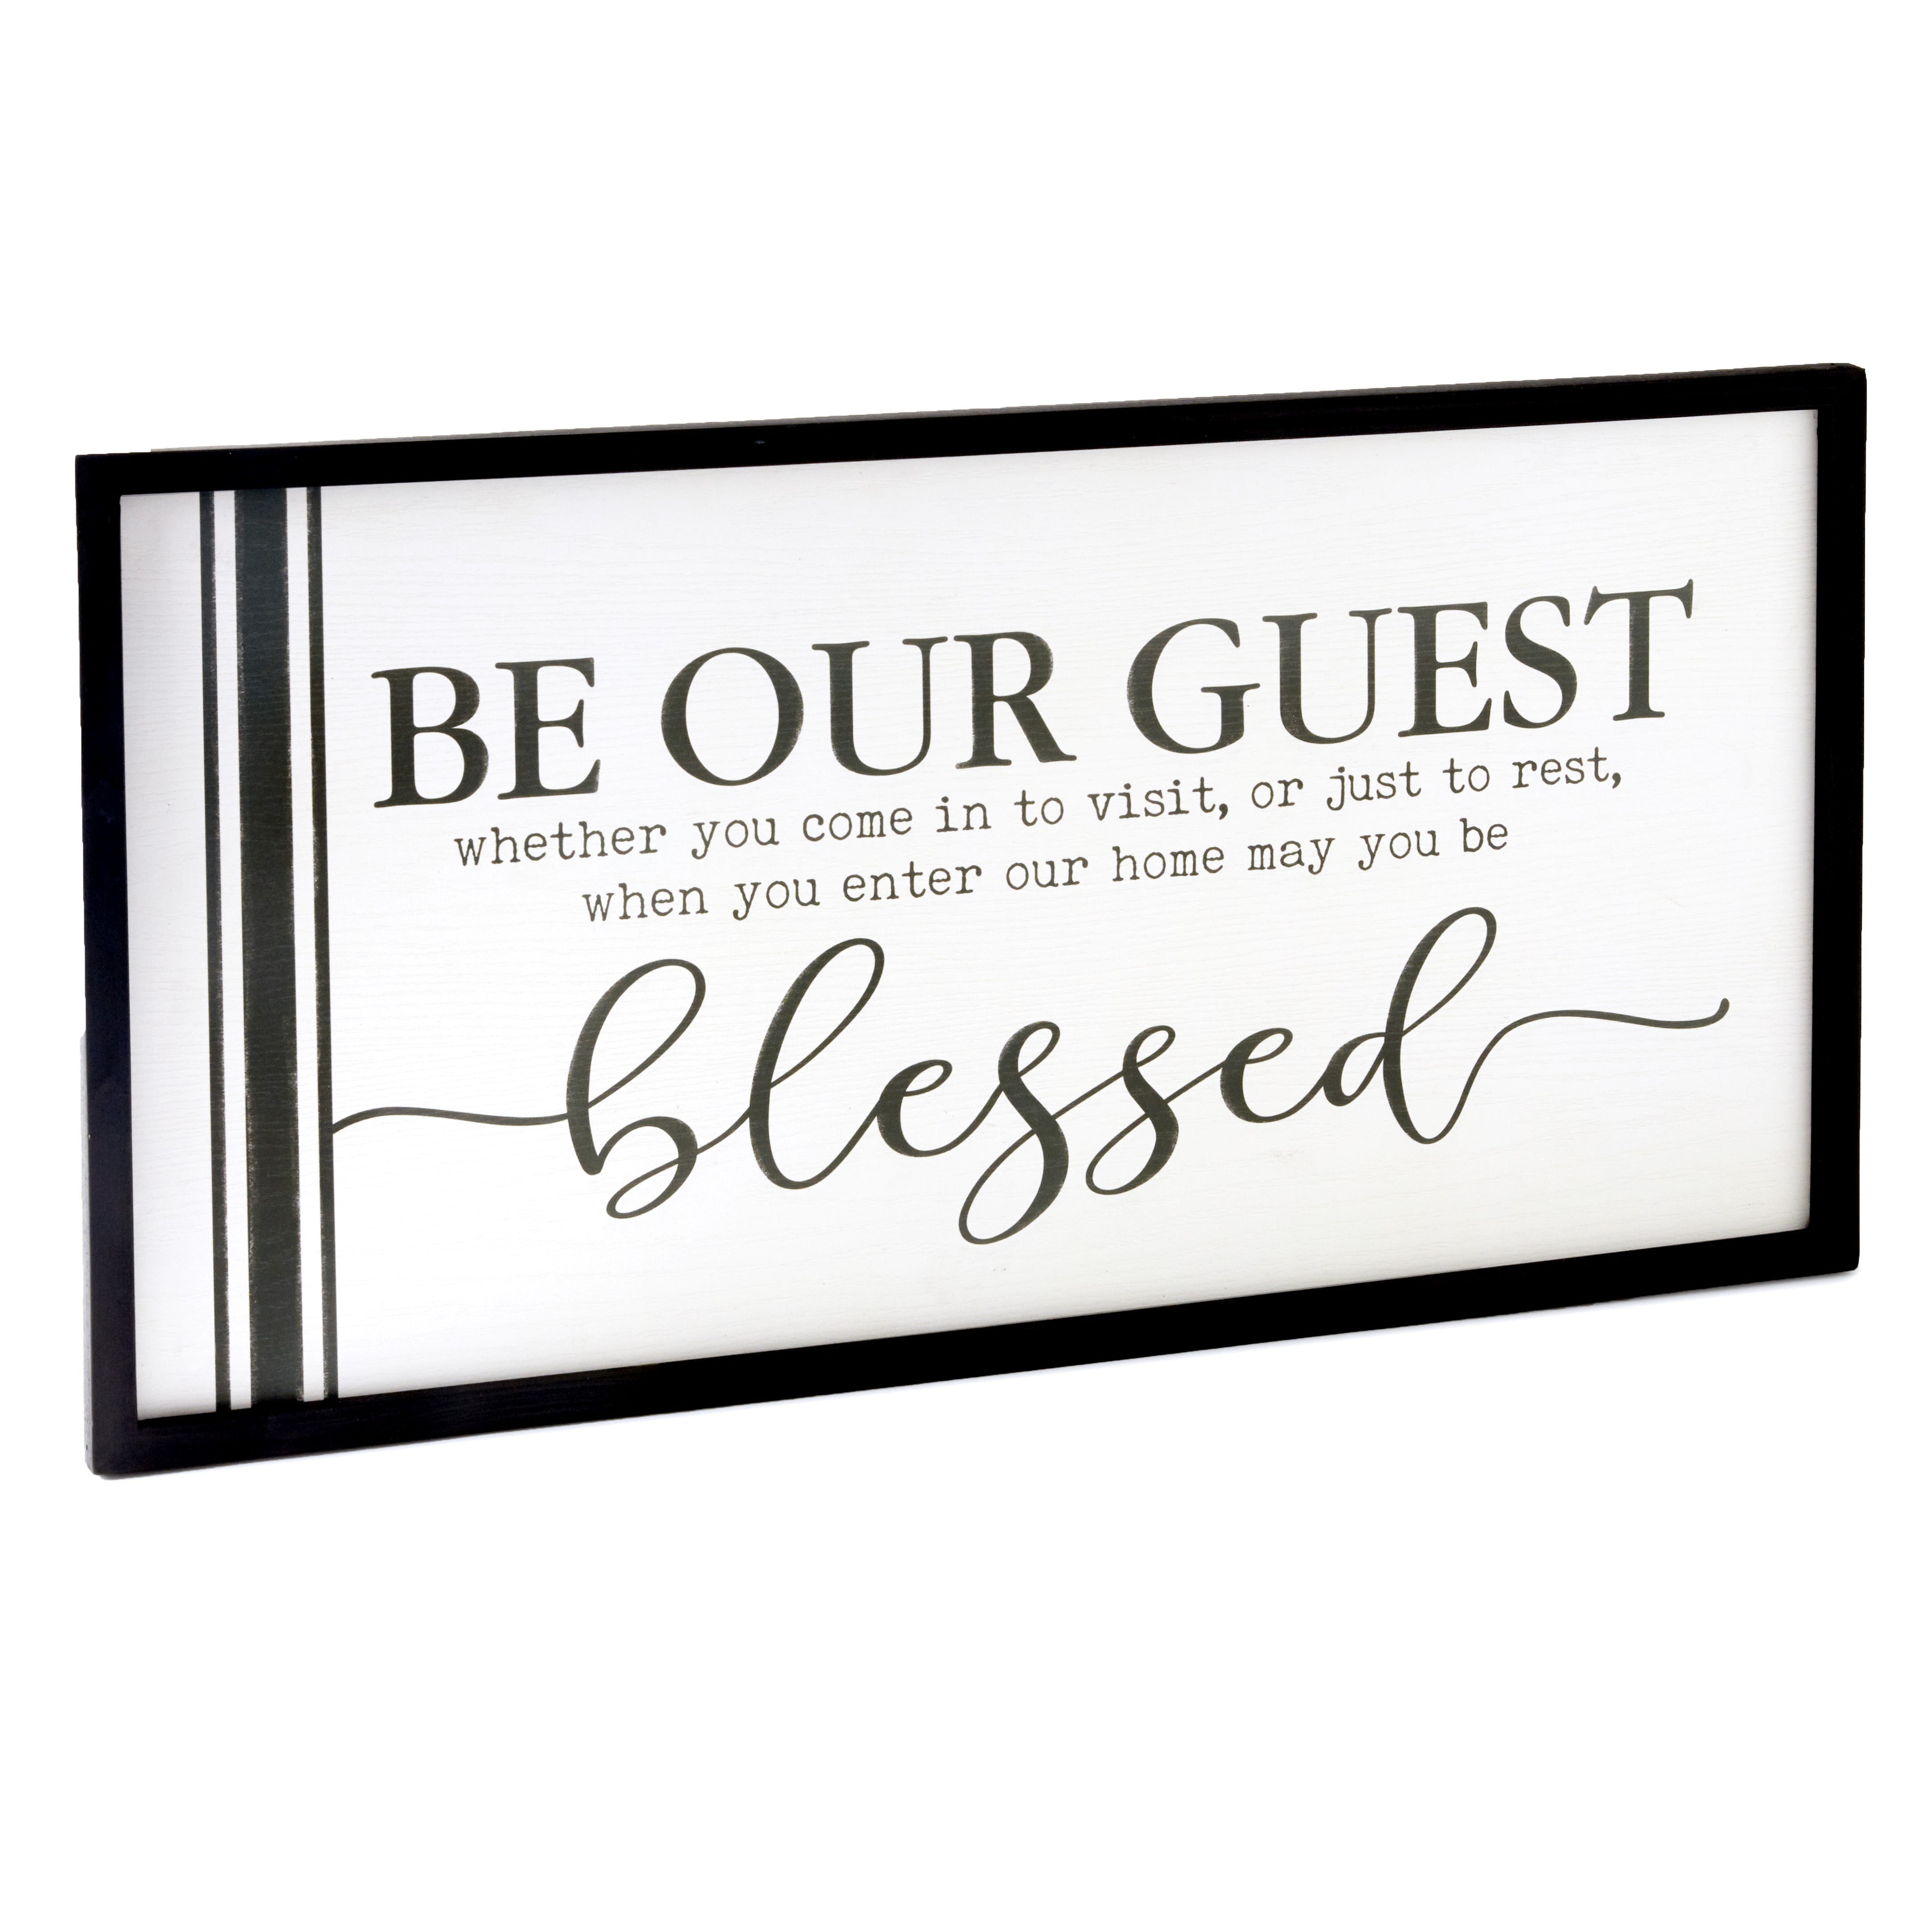 Contemporary Home Accent Be Our Guest WiFi Password Sign for Visitors 